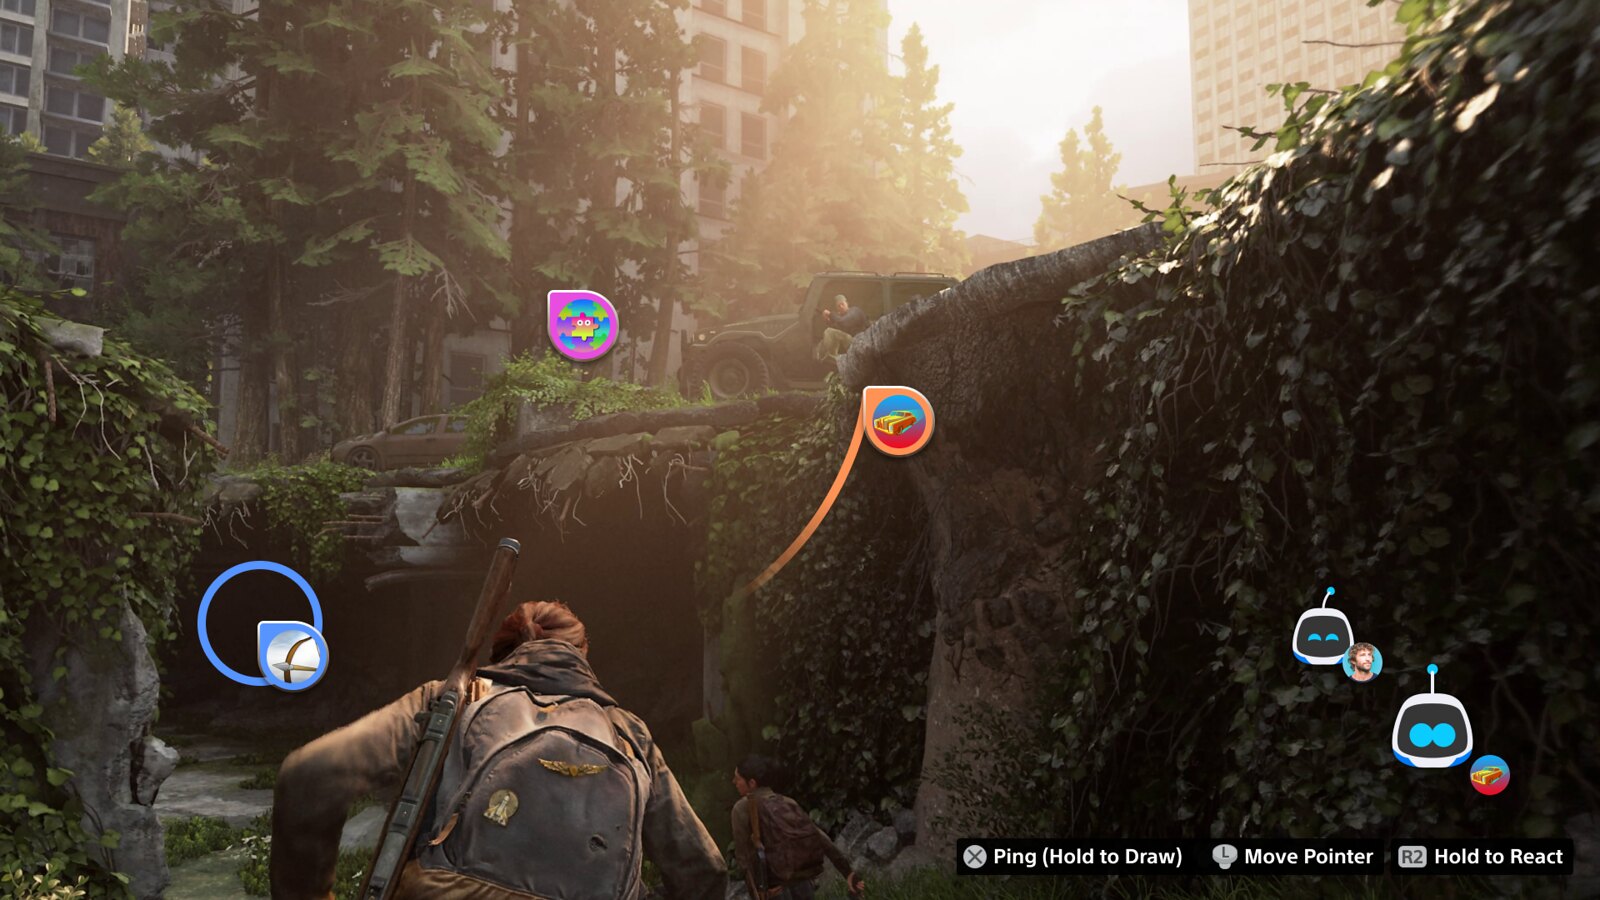 PS5 UI screenshot showing pointers and emoji reaction on the The Last of Us Part II Remastered gameplay screen